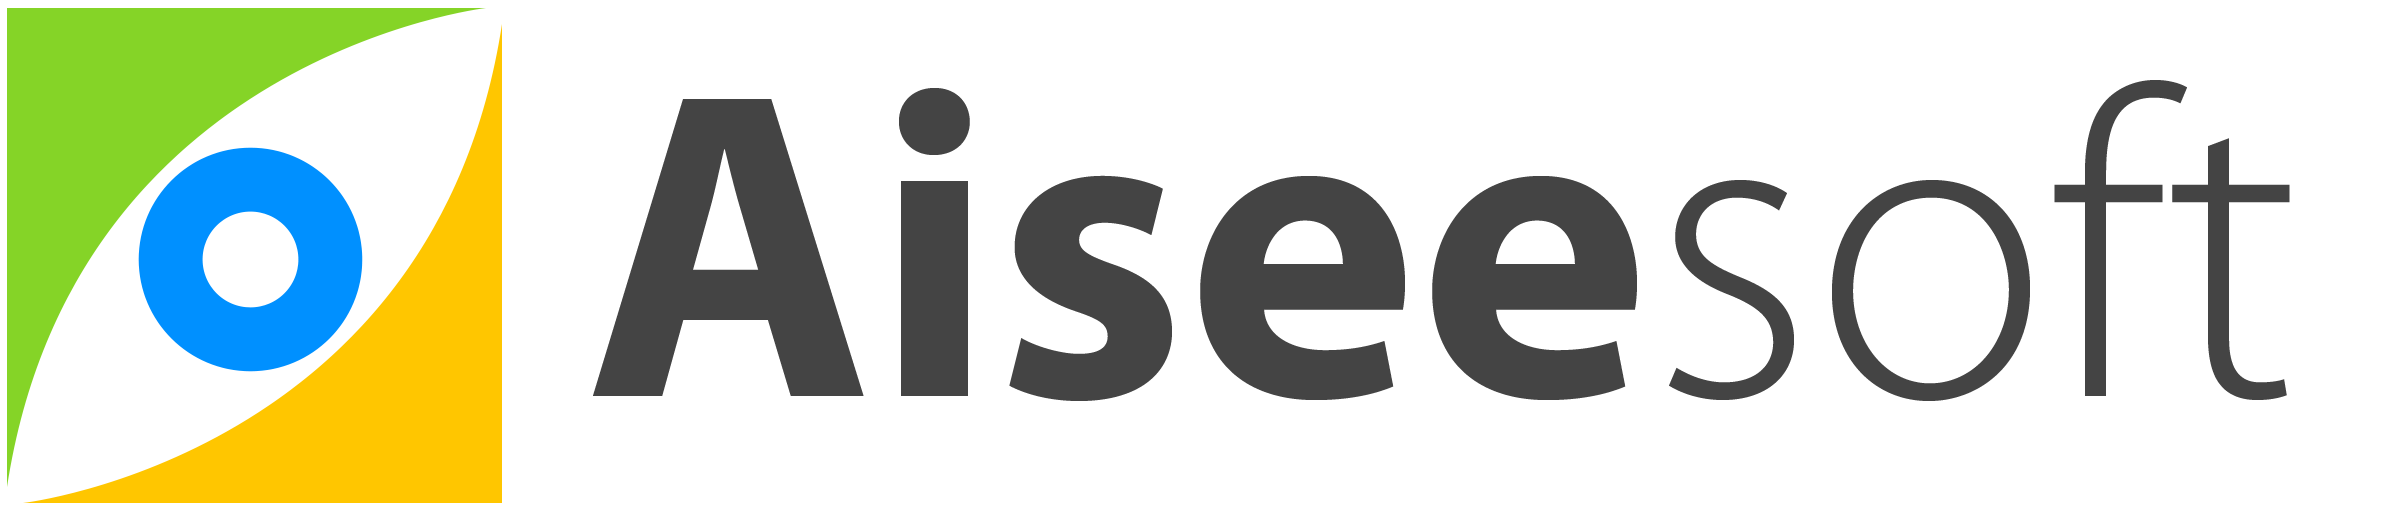 Aiseesoft Coupons